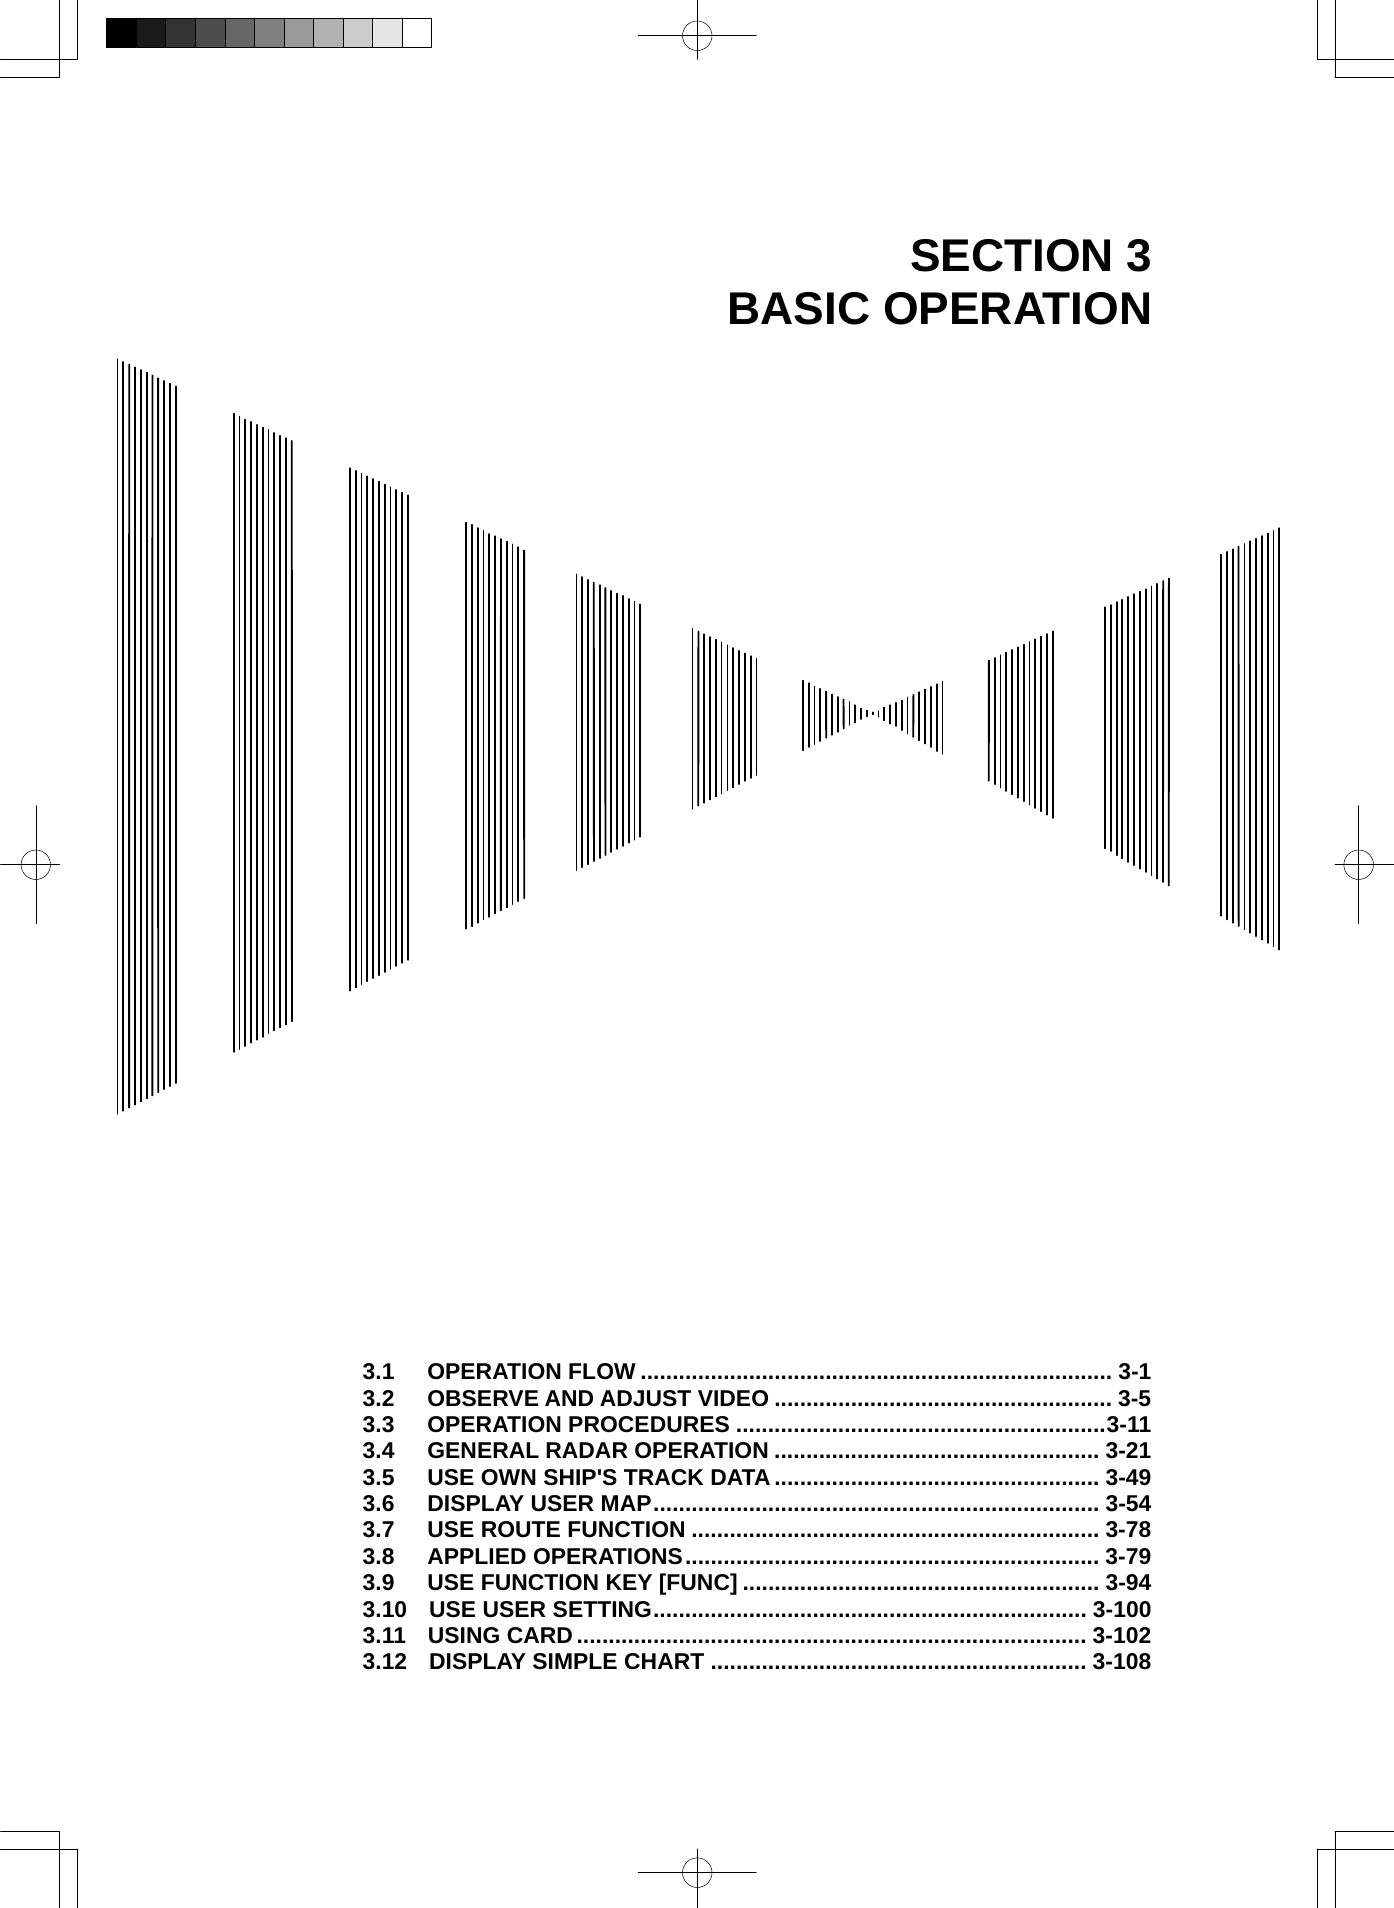  SECTION 3 BASIC OPERATION                                      3.1  OPERATION FLOW .......................................................................... 3-1 3.2  OBSERVE AND ADJUST VIDEO ..................................................... 3-5 3.3  OPERATION PROCEDURES ..........................................................3-11 3.4  GENERAL RADAR OPERATION ................................................... 3-21 3.5  USE OWN SHIP&apos;S TRACK DATA ................................................... 3-49 3.6  DISPLAY USER MAP...................................................................... 3-54 3.7  USE ROUTE FUNCTION ................................................................ 3-78 3.8  APPLIED OPERATIONS................................................................. 3-79 3.9  USE FUNCTION KEY [FUNC] ........................................................ 3-94 3.10 USE USER SETTING.................................................................... 3-100 3.11 USING CARD ................................................................................ 3-102 3.12 DISPLAY SIMPLE CHART ........................................................... 3-108 